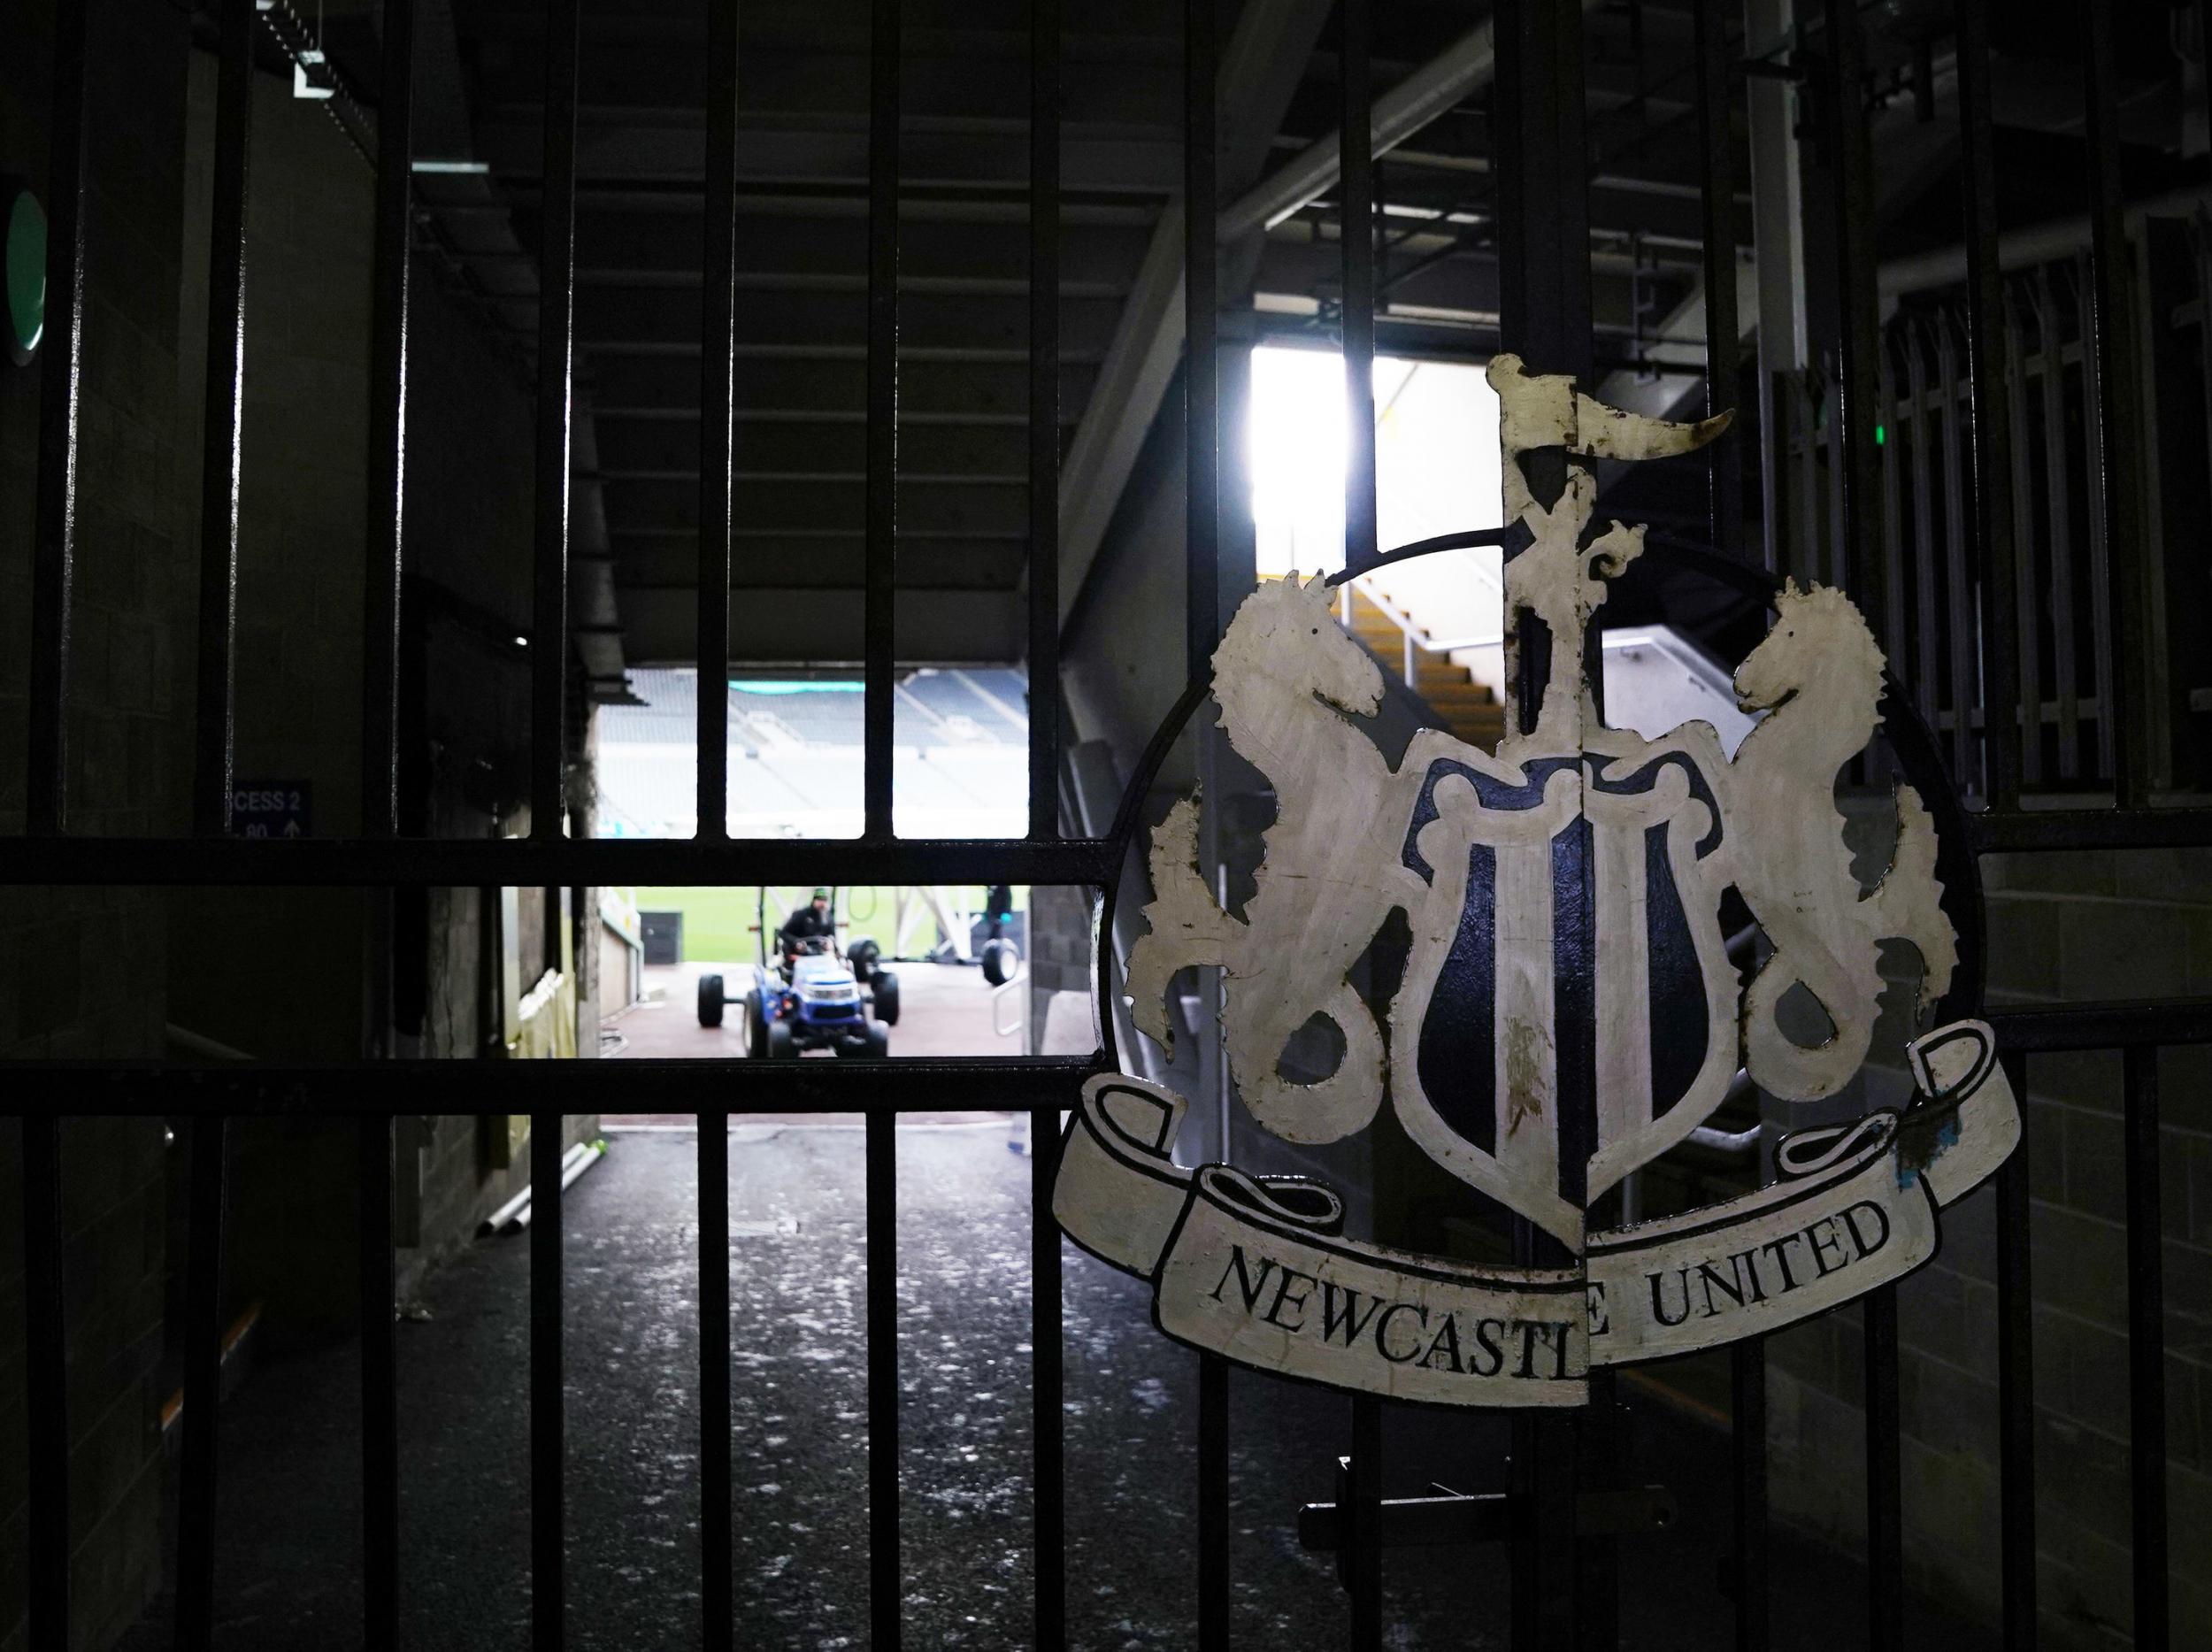 Newcastle are set to come into Saudi ownership following the takeover